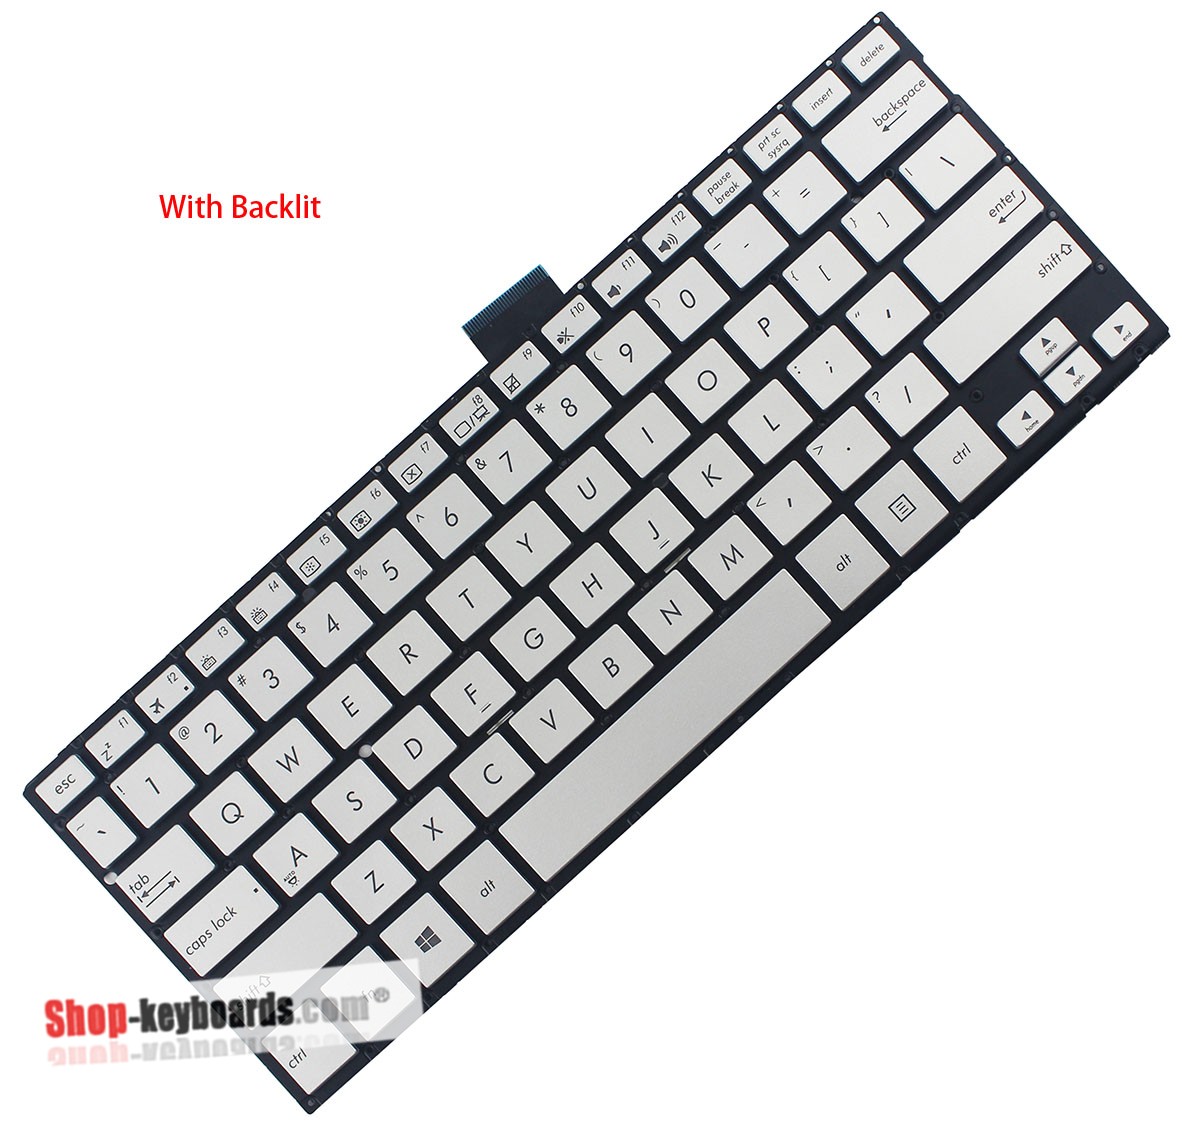 Asus 0KNB0-362DLA00 Keyboard replacement